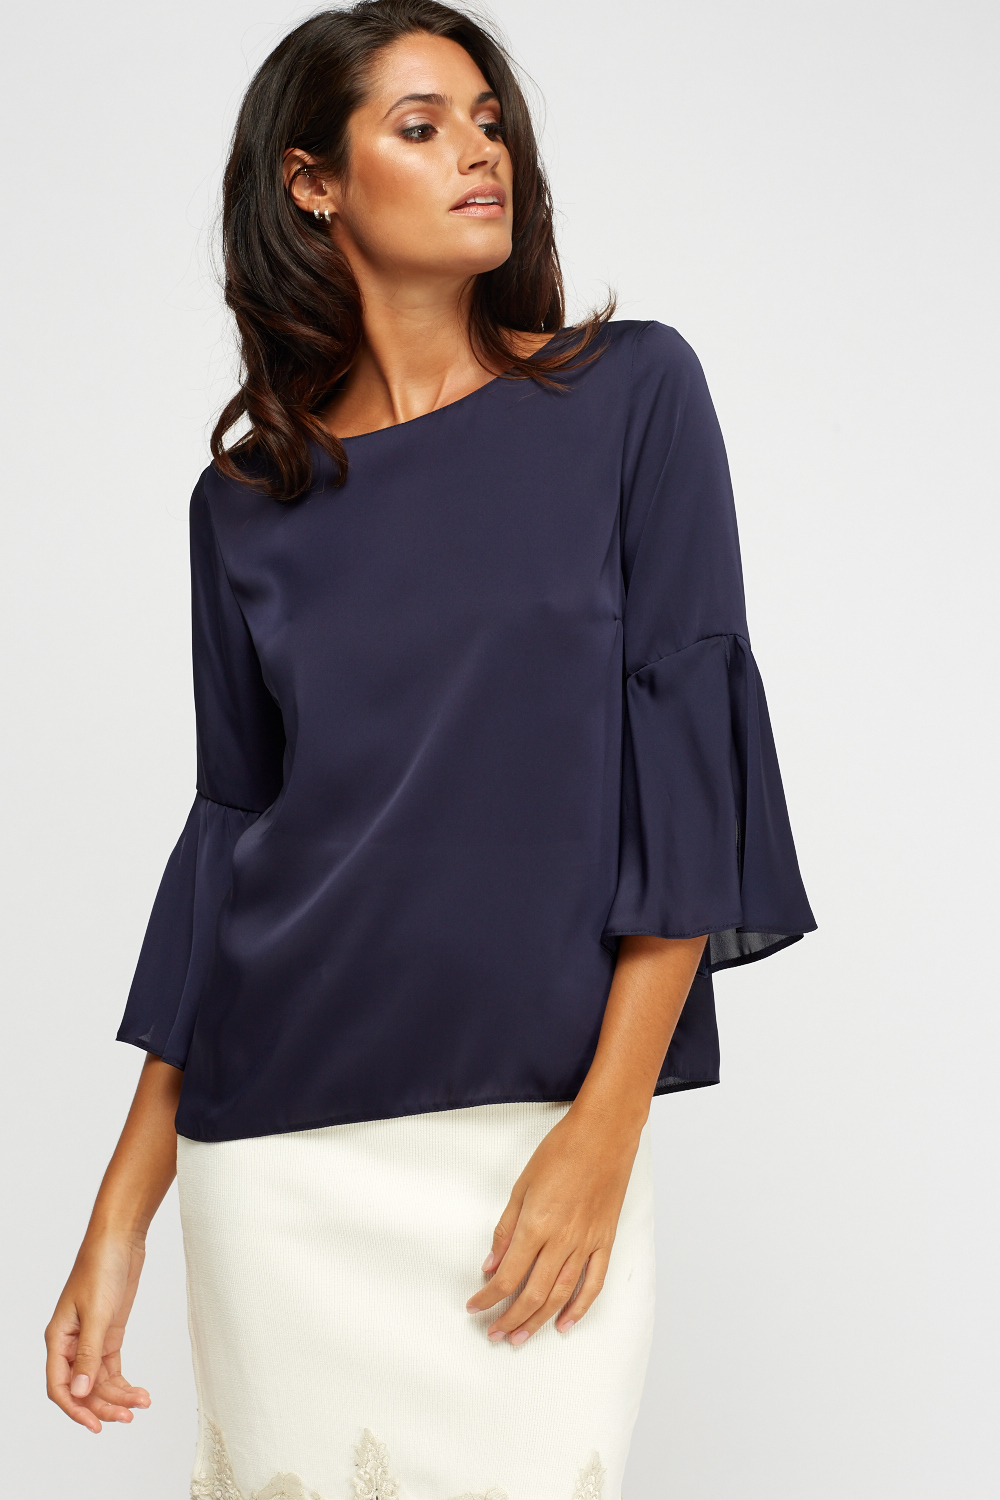 Flare Sleeve Sheer Blouse - Just $7